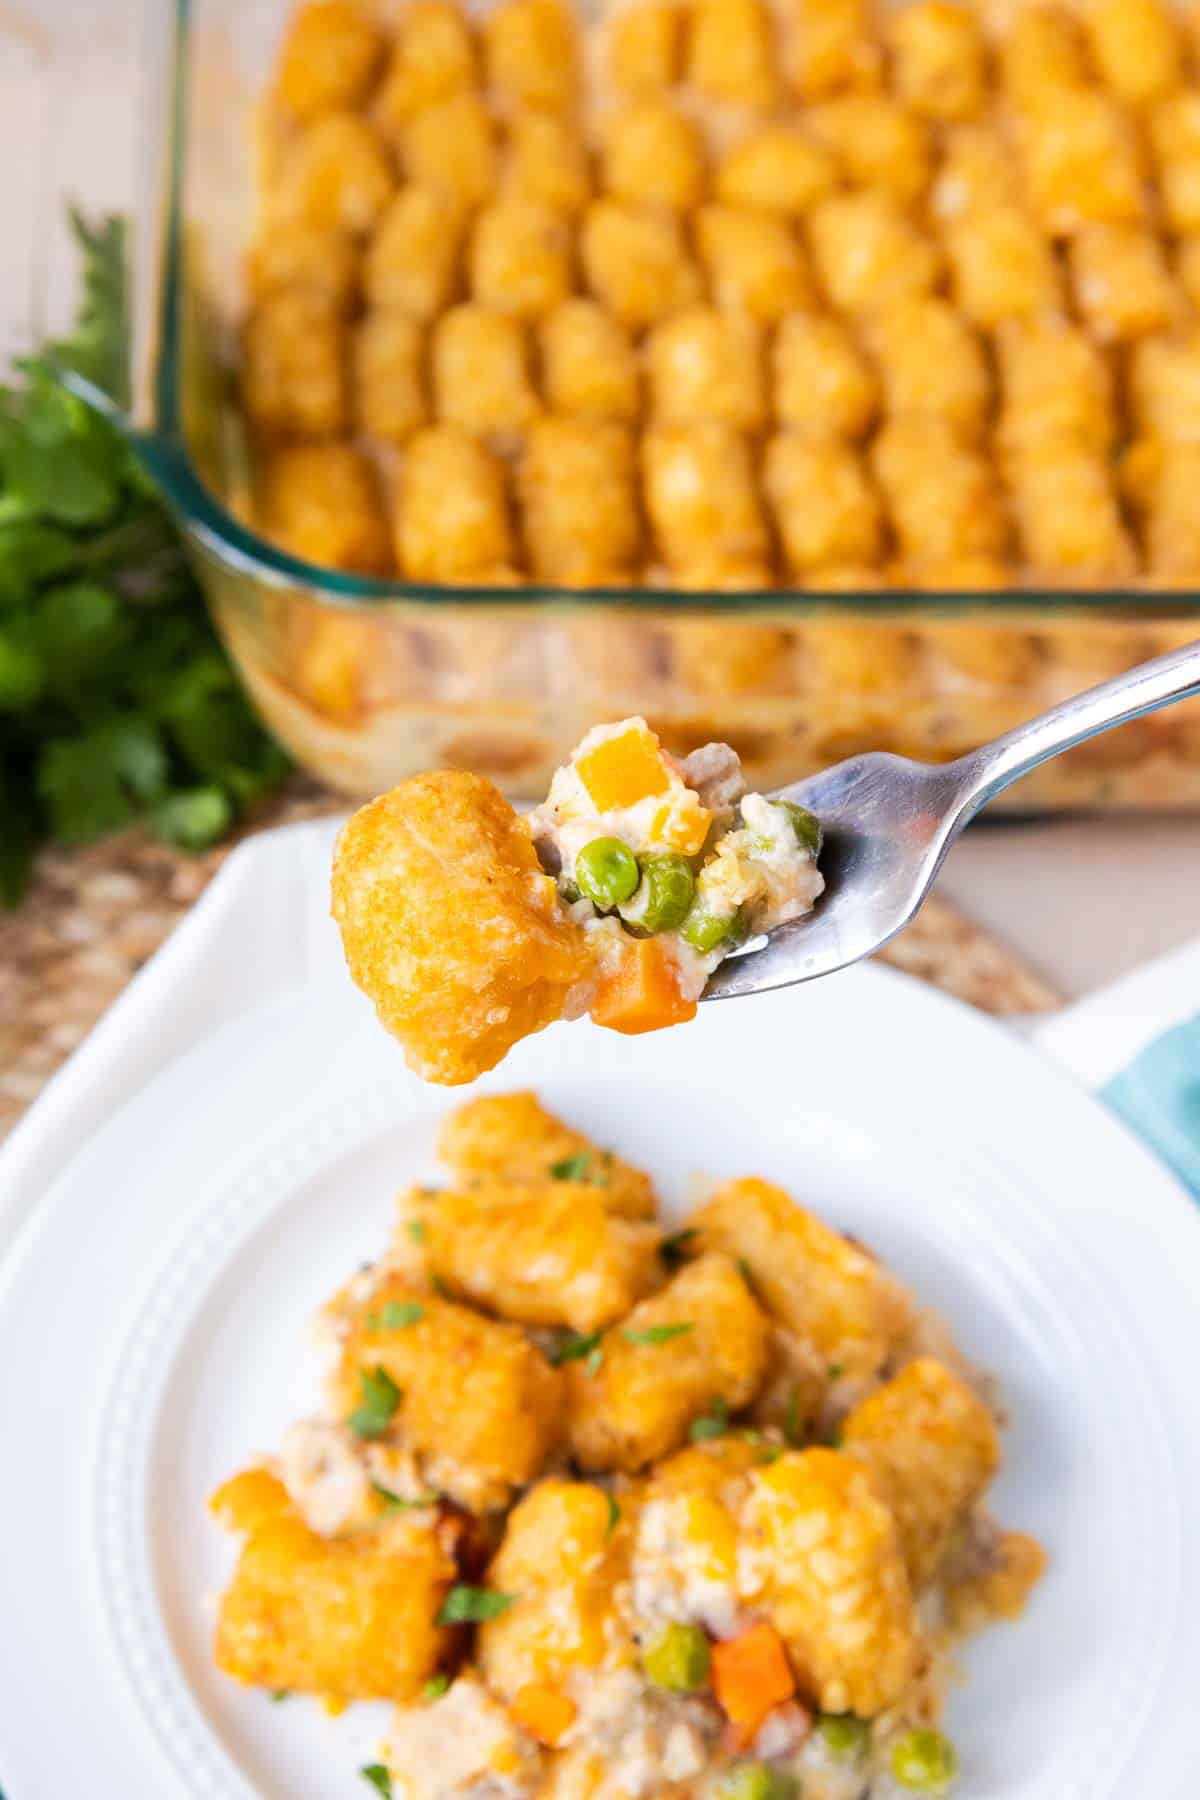 A forkful of Turkey Tater Tot Casserole to show the ground turkey, peas, and carrots in a creamy sauce.